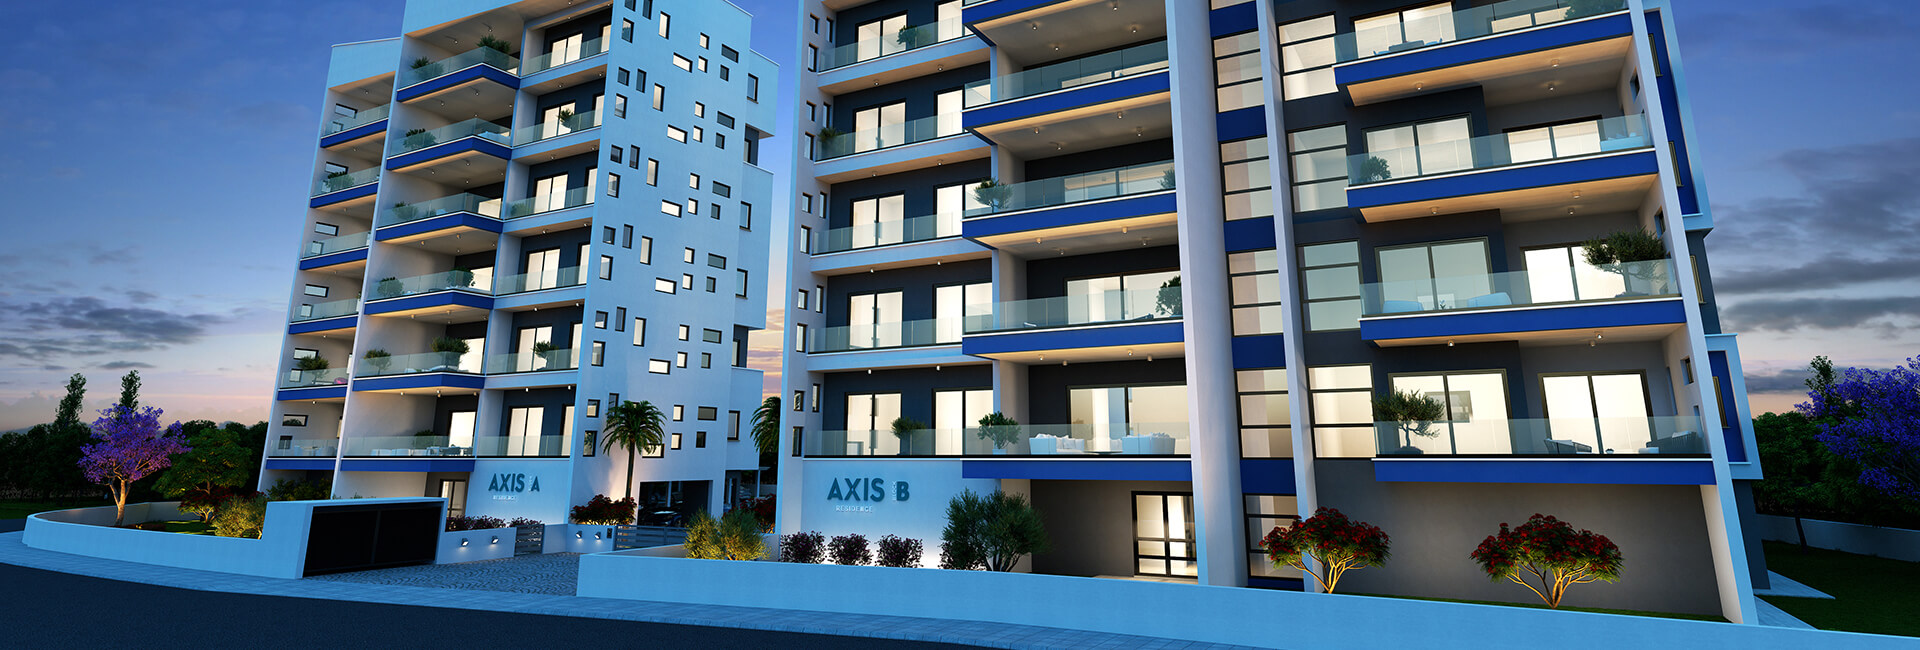 Axis Residence